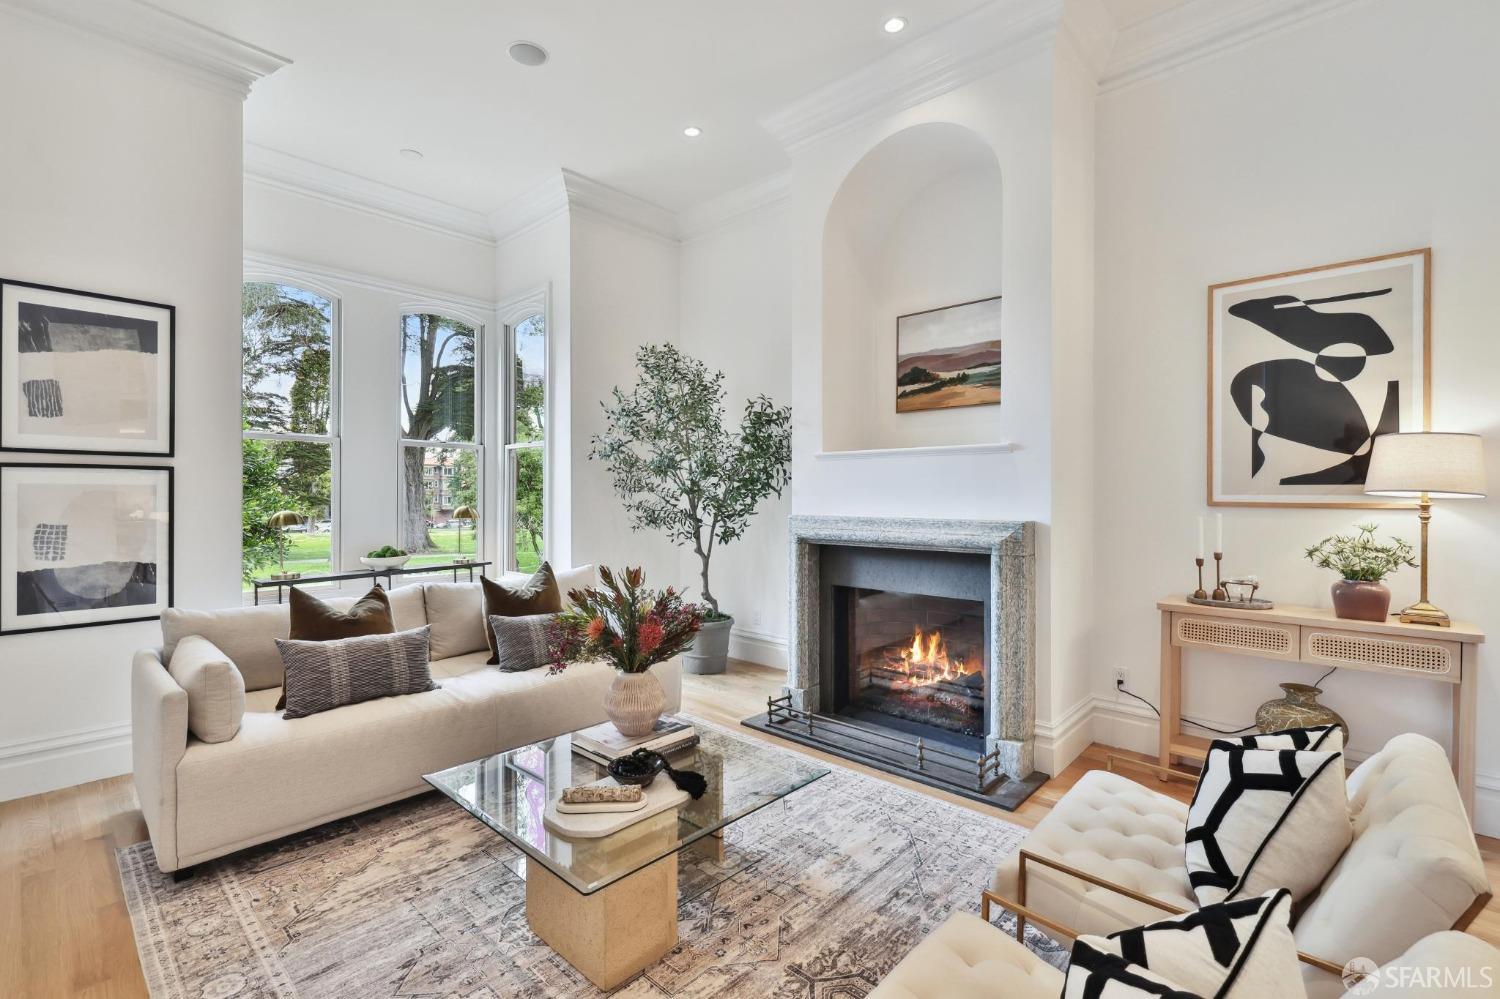 On the cusp of Cole Valley, Haight Ashbury and NOPA, this magnificent, 3 level, ~3,000+ sq ft, renovated Italianate Vic home w 3 ensuite BDRs on the top level, a roof deck, studio apartment/4th bedroom, parking for 2 cars, a 98 WalkScore, and a tranquil backyard oasis, is truly a rare find! Fab double parlor with soaring approx 12 ft ceilings and an antique marble fireplace. Carrara marble kitchen opens to family rm and Ipe deck/large level lush backyard. Sumptuous primary suite w luxe ensuite marble BA and private deck. Renovated studio apt w soaring ceilings, sliding doors to a private patio, a renovated tiled full bath, and a full kitchen w stainless appliances. Newer foundations, electrical, plumbing and roof. Verdant ~3436 square foot lot with a pro designed, resort style, backyard  think al fresco dining, dogs and children playing, grilling and relaxing. 2 car parking. A walker's paradise, this home's prime location offers world class restaurants, markets, coffee shops, and boutiques all within just a few blocks in any direction. Steps to iconic Golden Gate Park, Japanese Tea Garden, Conservatory of Flowers, dog park, tech shuttles, the N-Judah, and several MUNI stops. 94 BikeScore  ride easily to Ocean Beach. A forever home like this rarely comes to market!